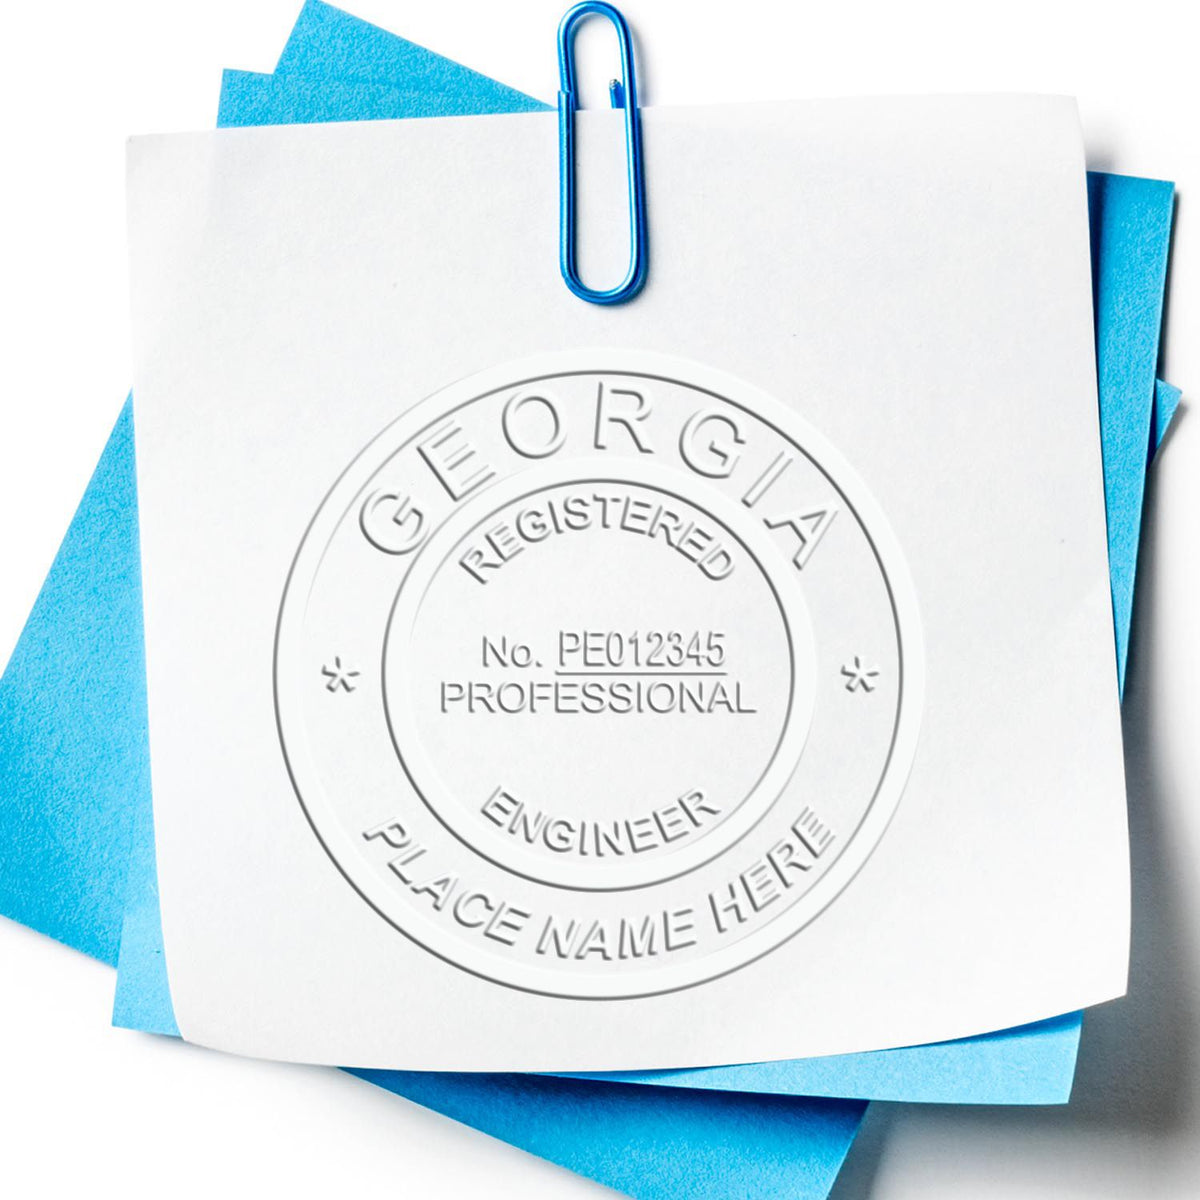 An in use photo of the Hybrid Georgia Engineer Seal showing a sample imprint on a cardstock